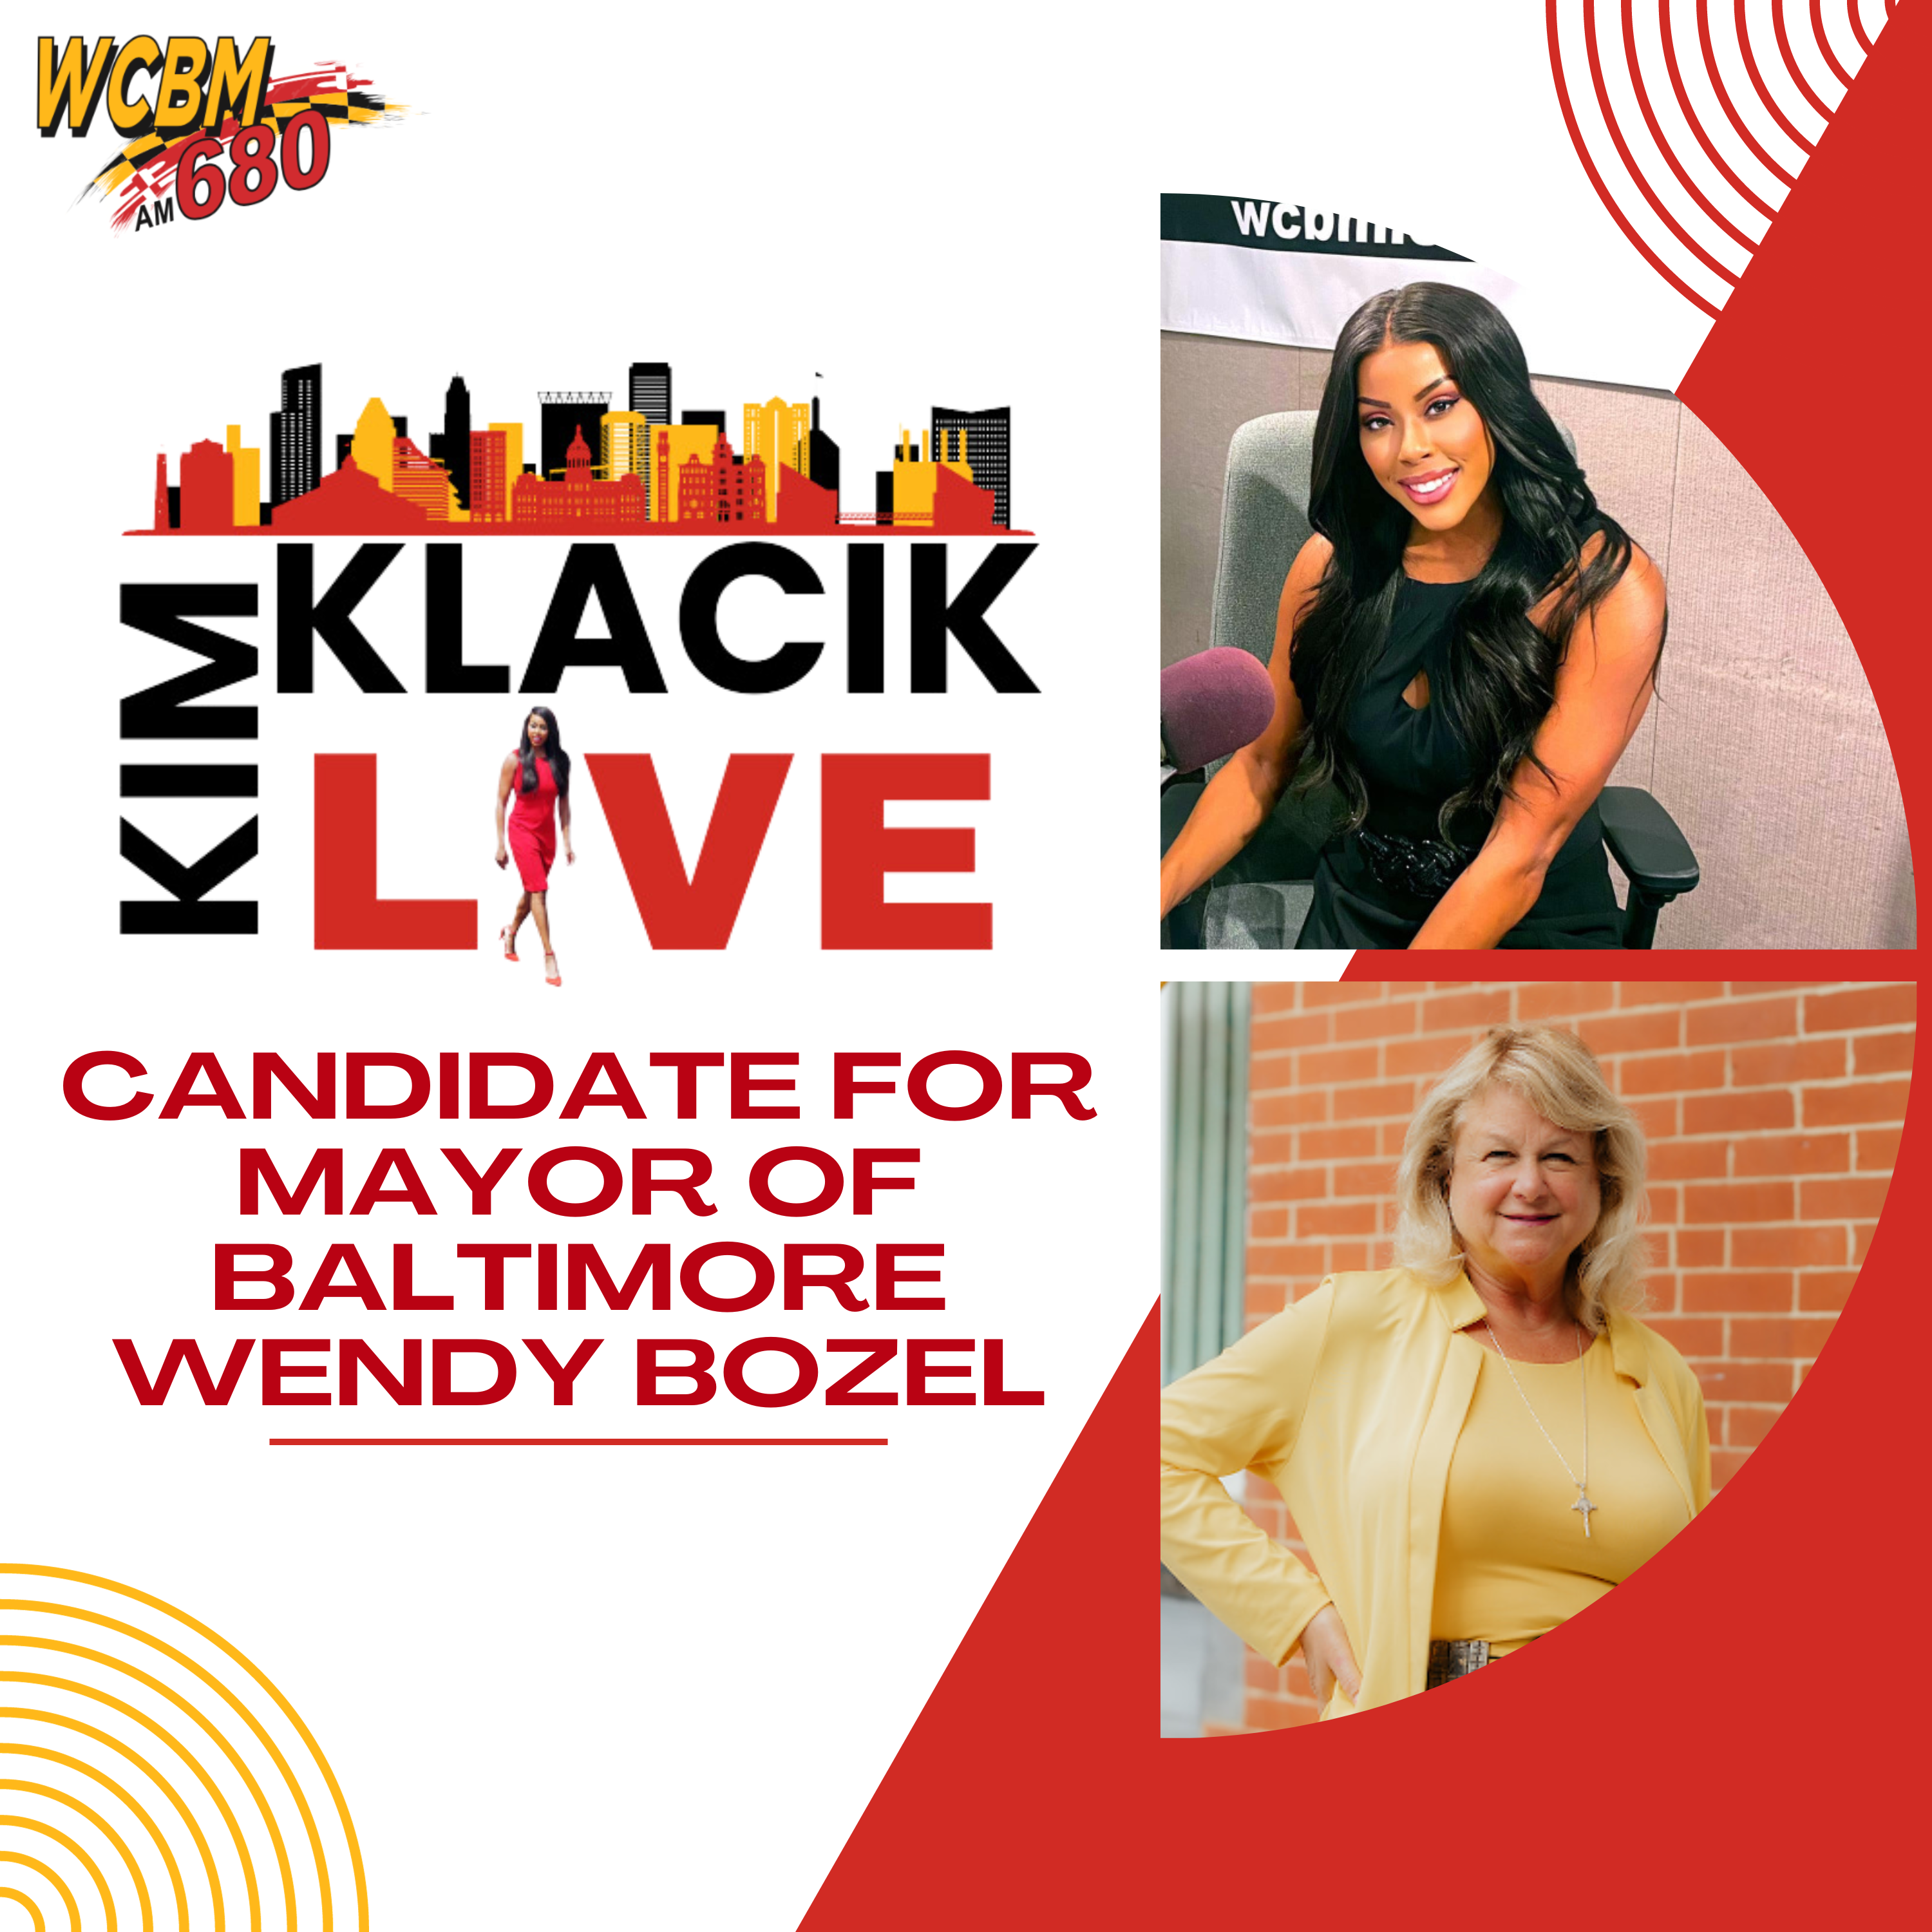 Kim interviews Candidate for Mayor of Baltimore Wendy Bozel